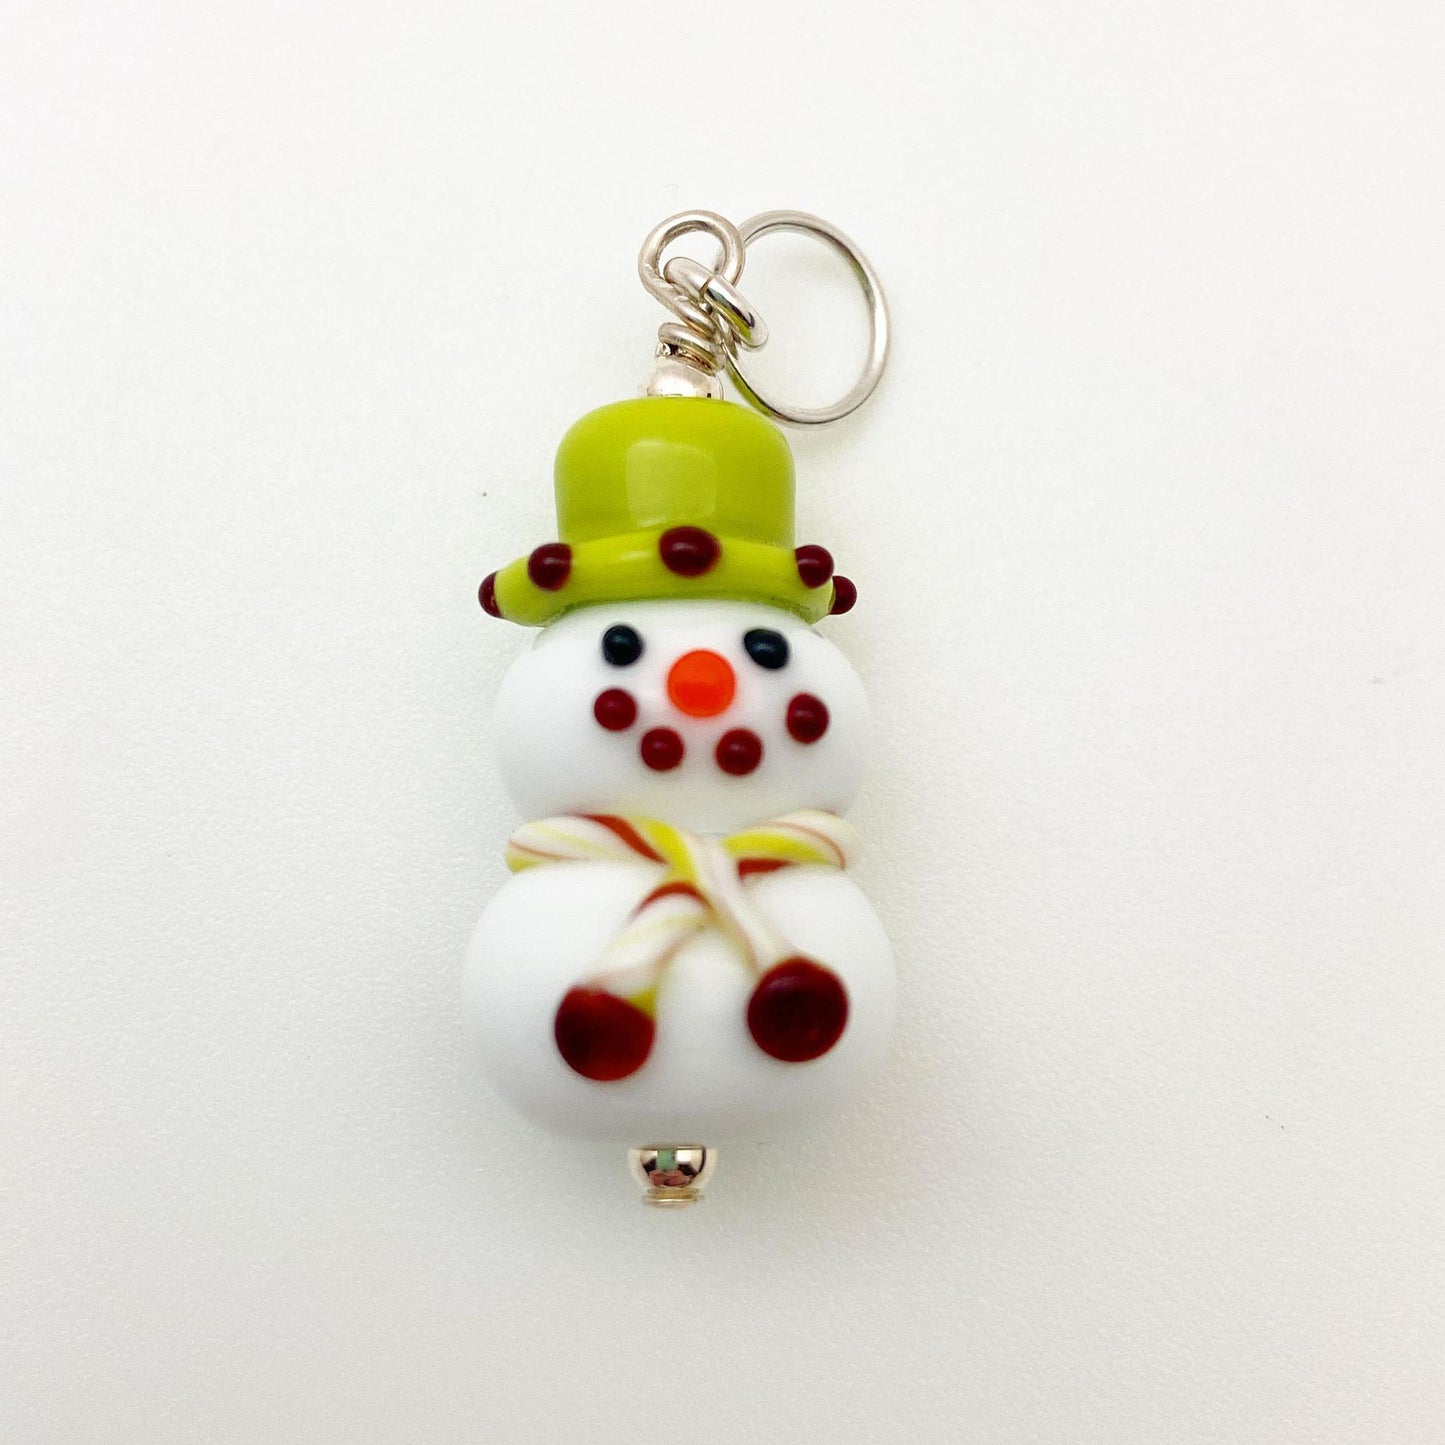 Pendant - Snowperson with Lime Green Hat - Handmade Glass